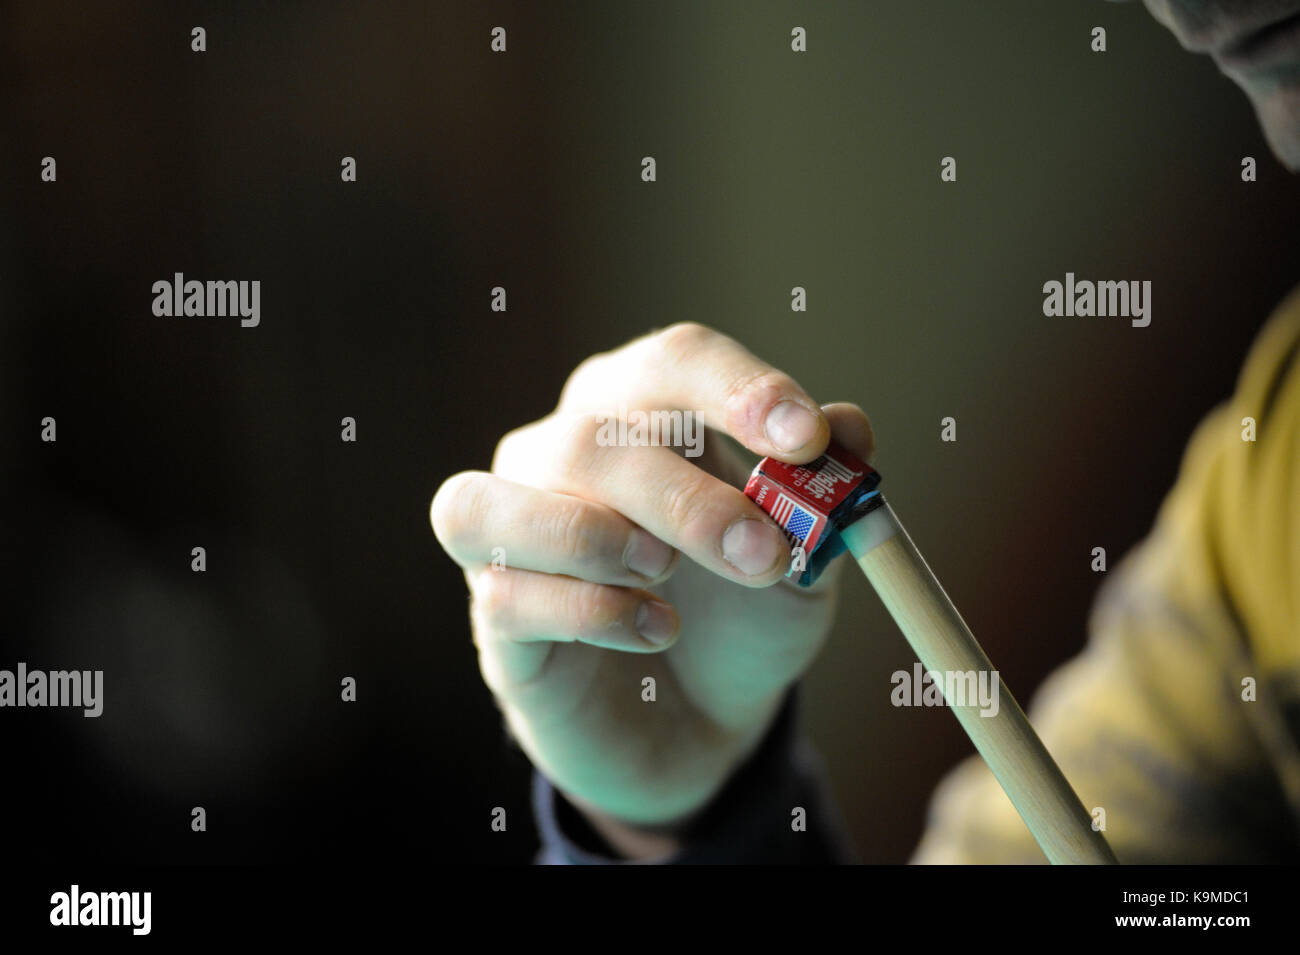 A player's arm rubbing a cue with a cue chalk Stock Photo